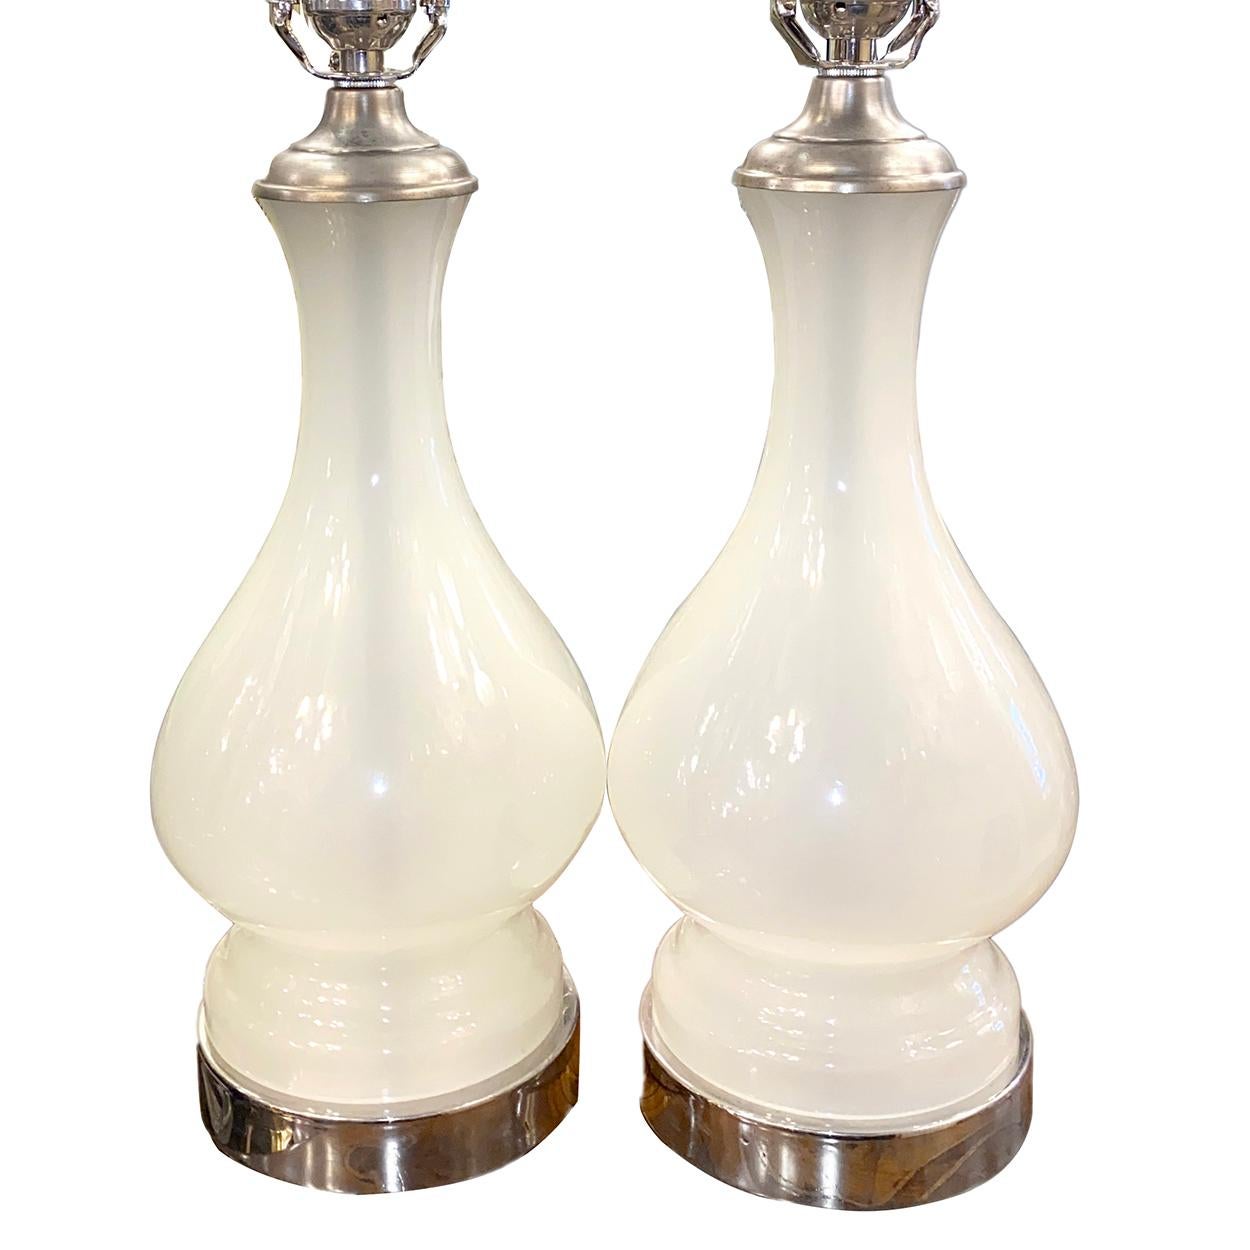 Pair of French 1930s white opaline table lamps with silver plated bases.

Measurements:
Height: 13.5